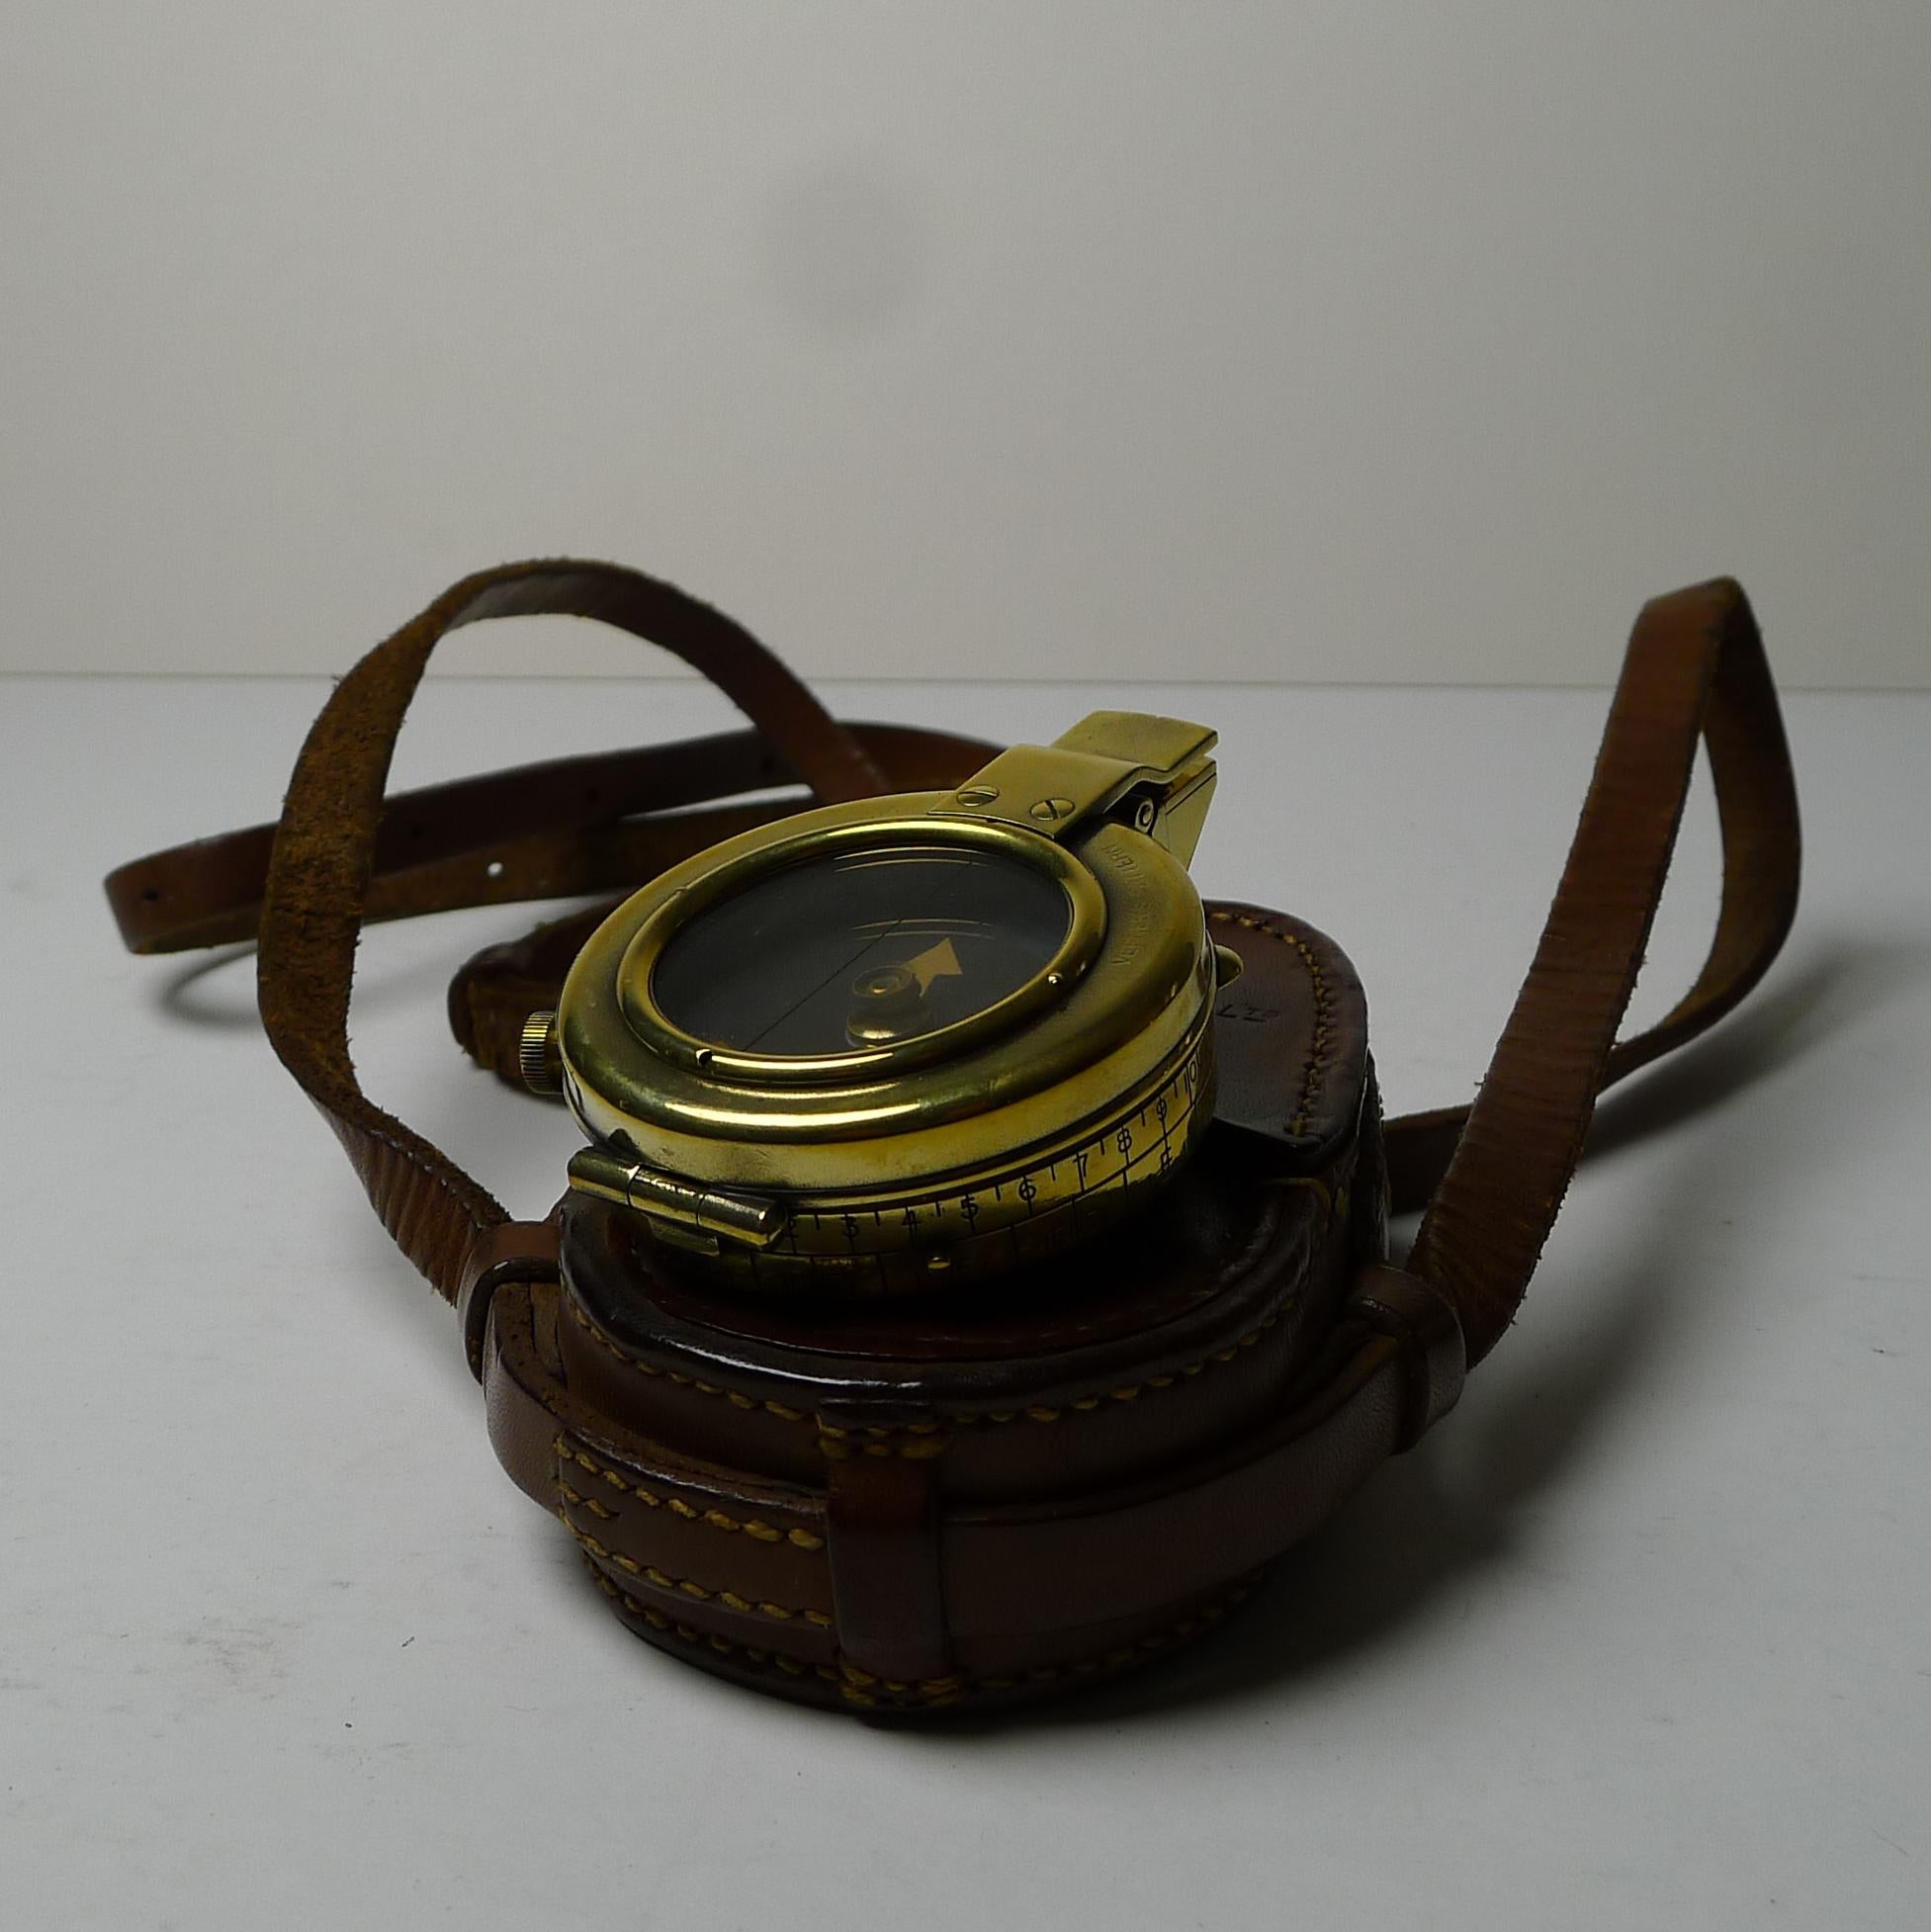 An excellent example of a First World War military compass. It is fully functioning, has a brass case and is mounted with lanyard ring. The glass face and numbered brass outer ring are perfectly intact. The rear of the case is stamped with war